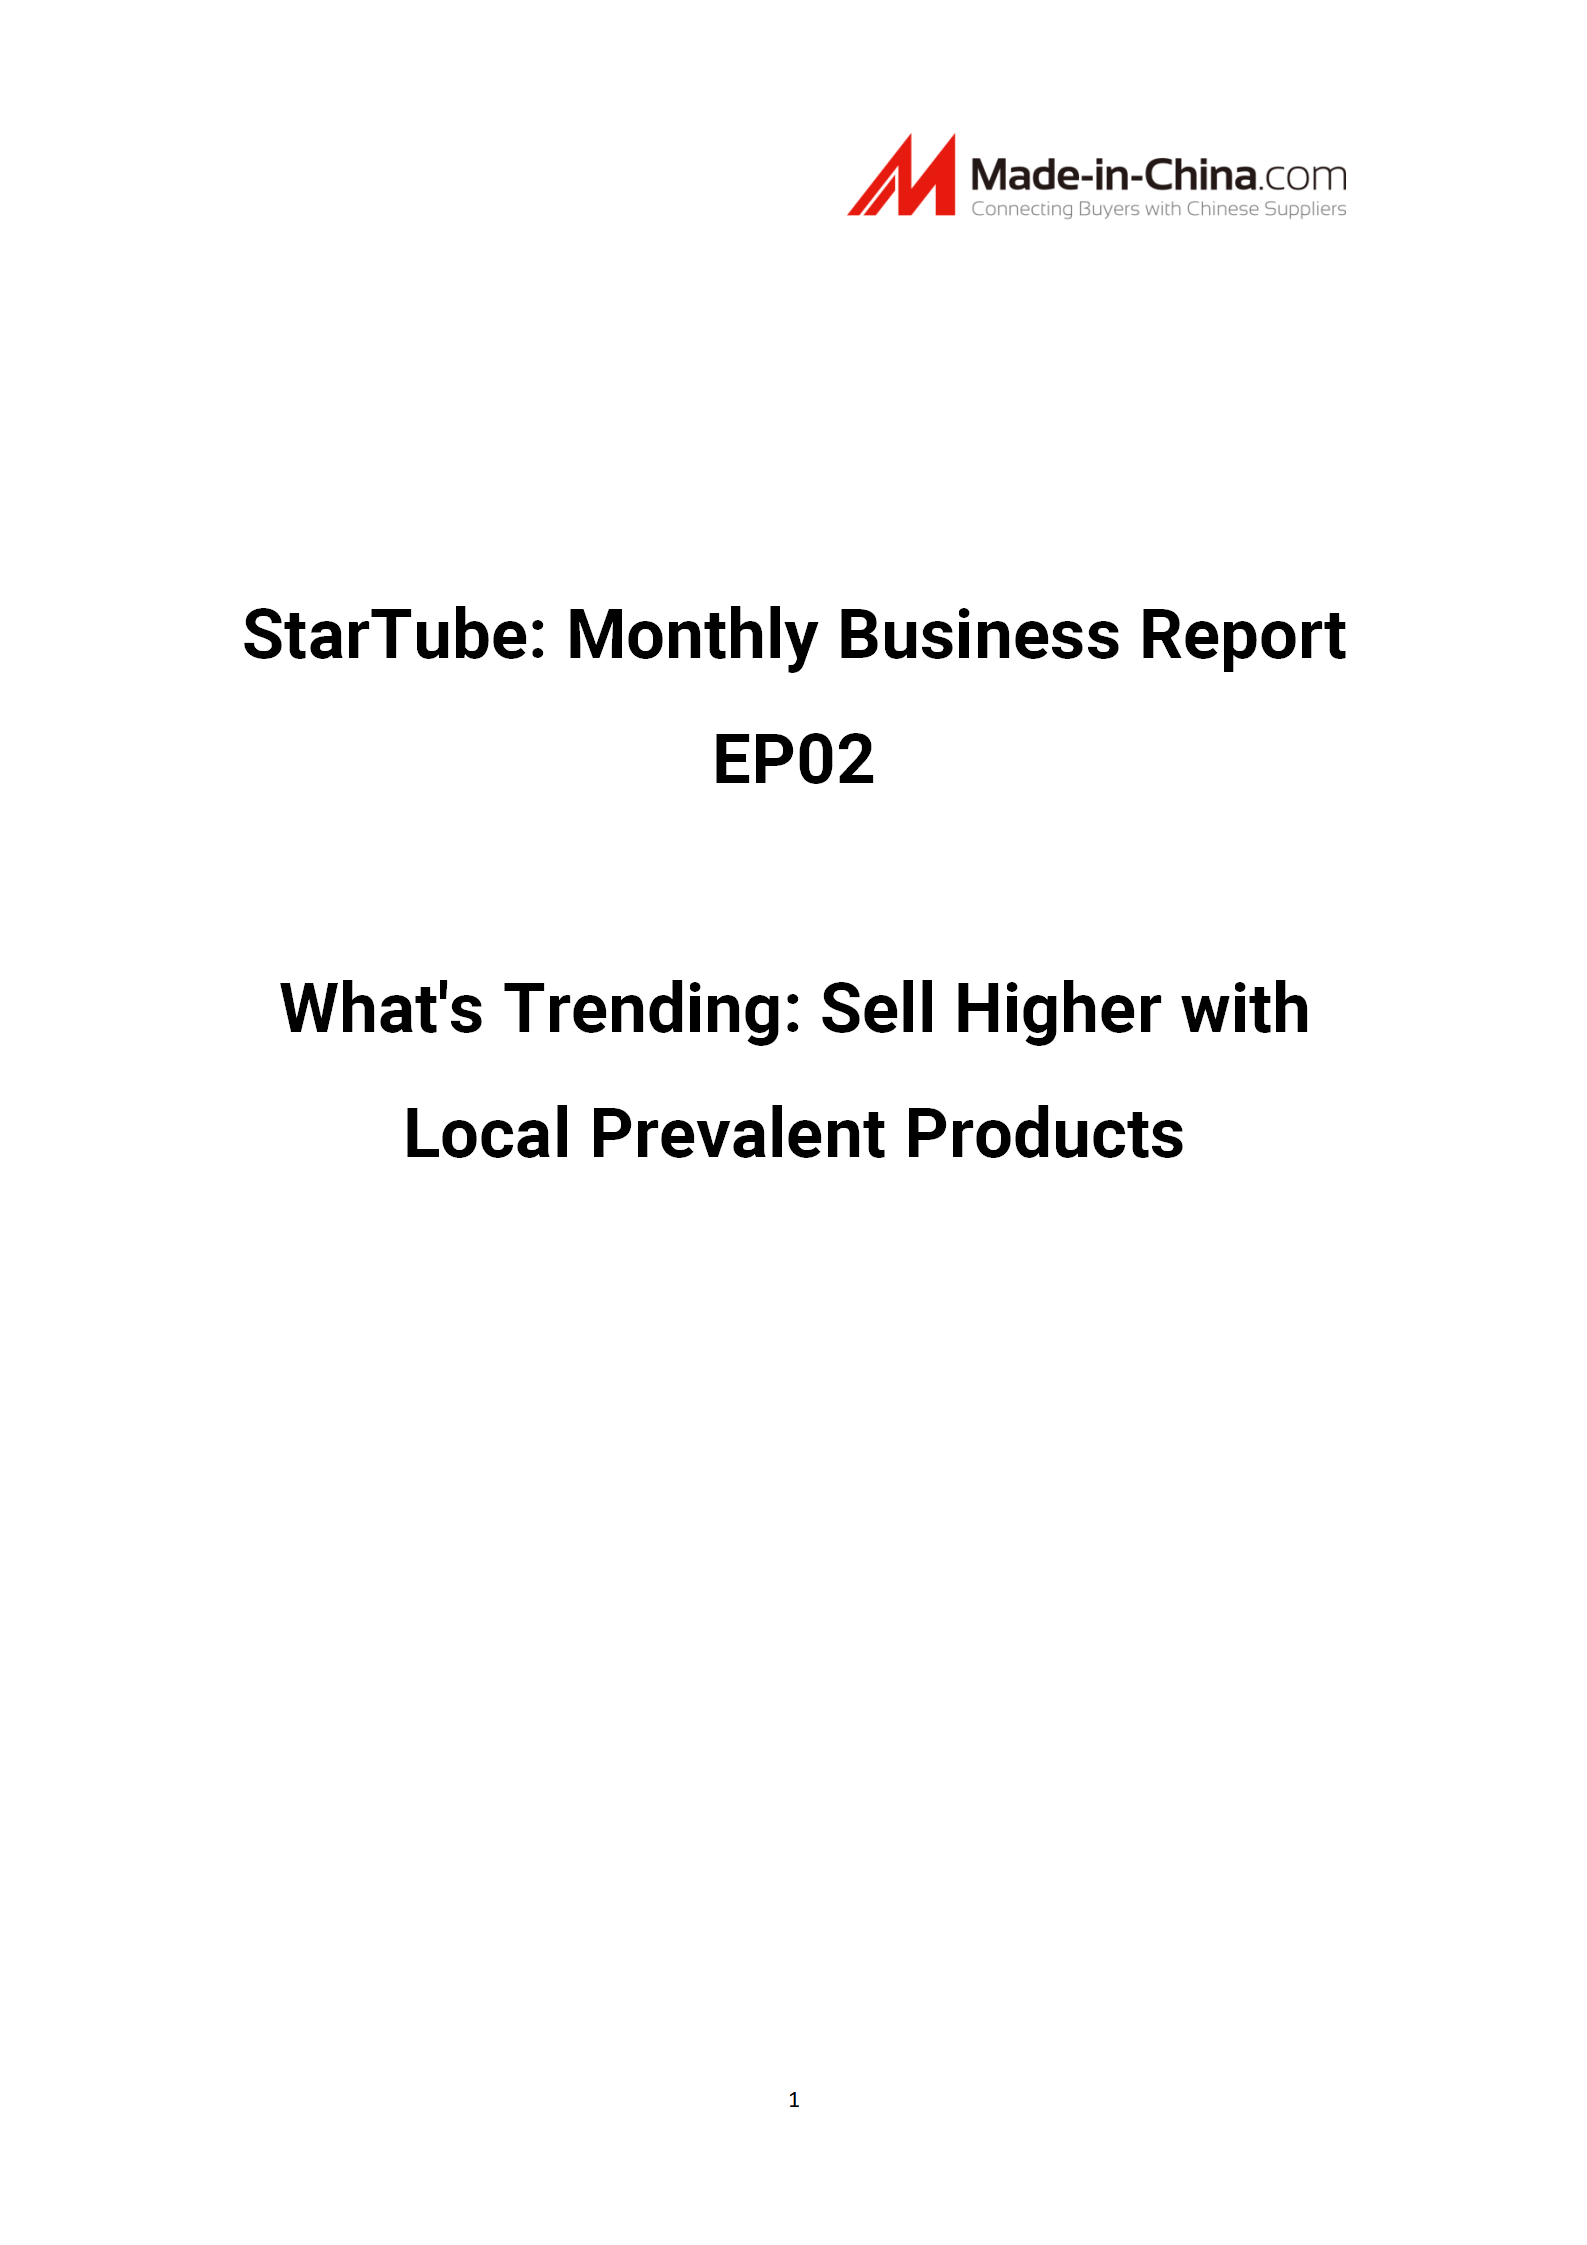 StarTube: Monthly Business Report EP02 Sell Higher with Local Prevalent Products_1